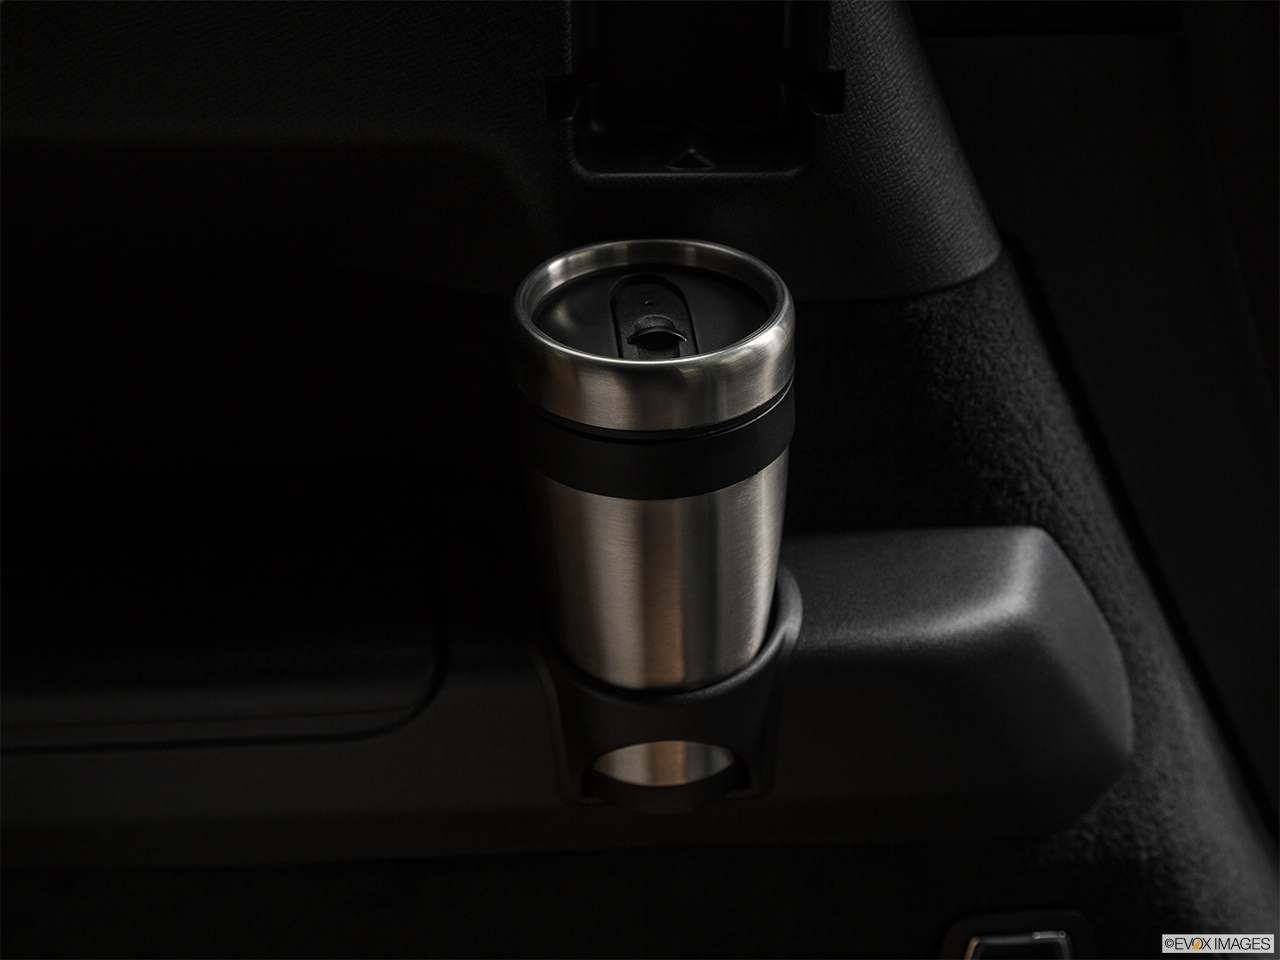 2018 Volvo XC90 T8 Inscription eAWD Plug-in Hybrid Third Row side cup holder with coffee prop. 